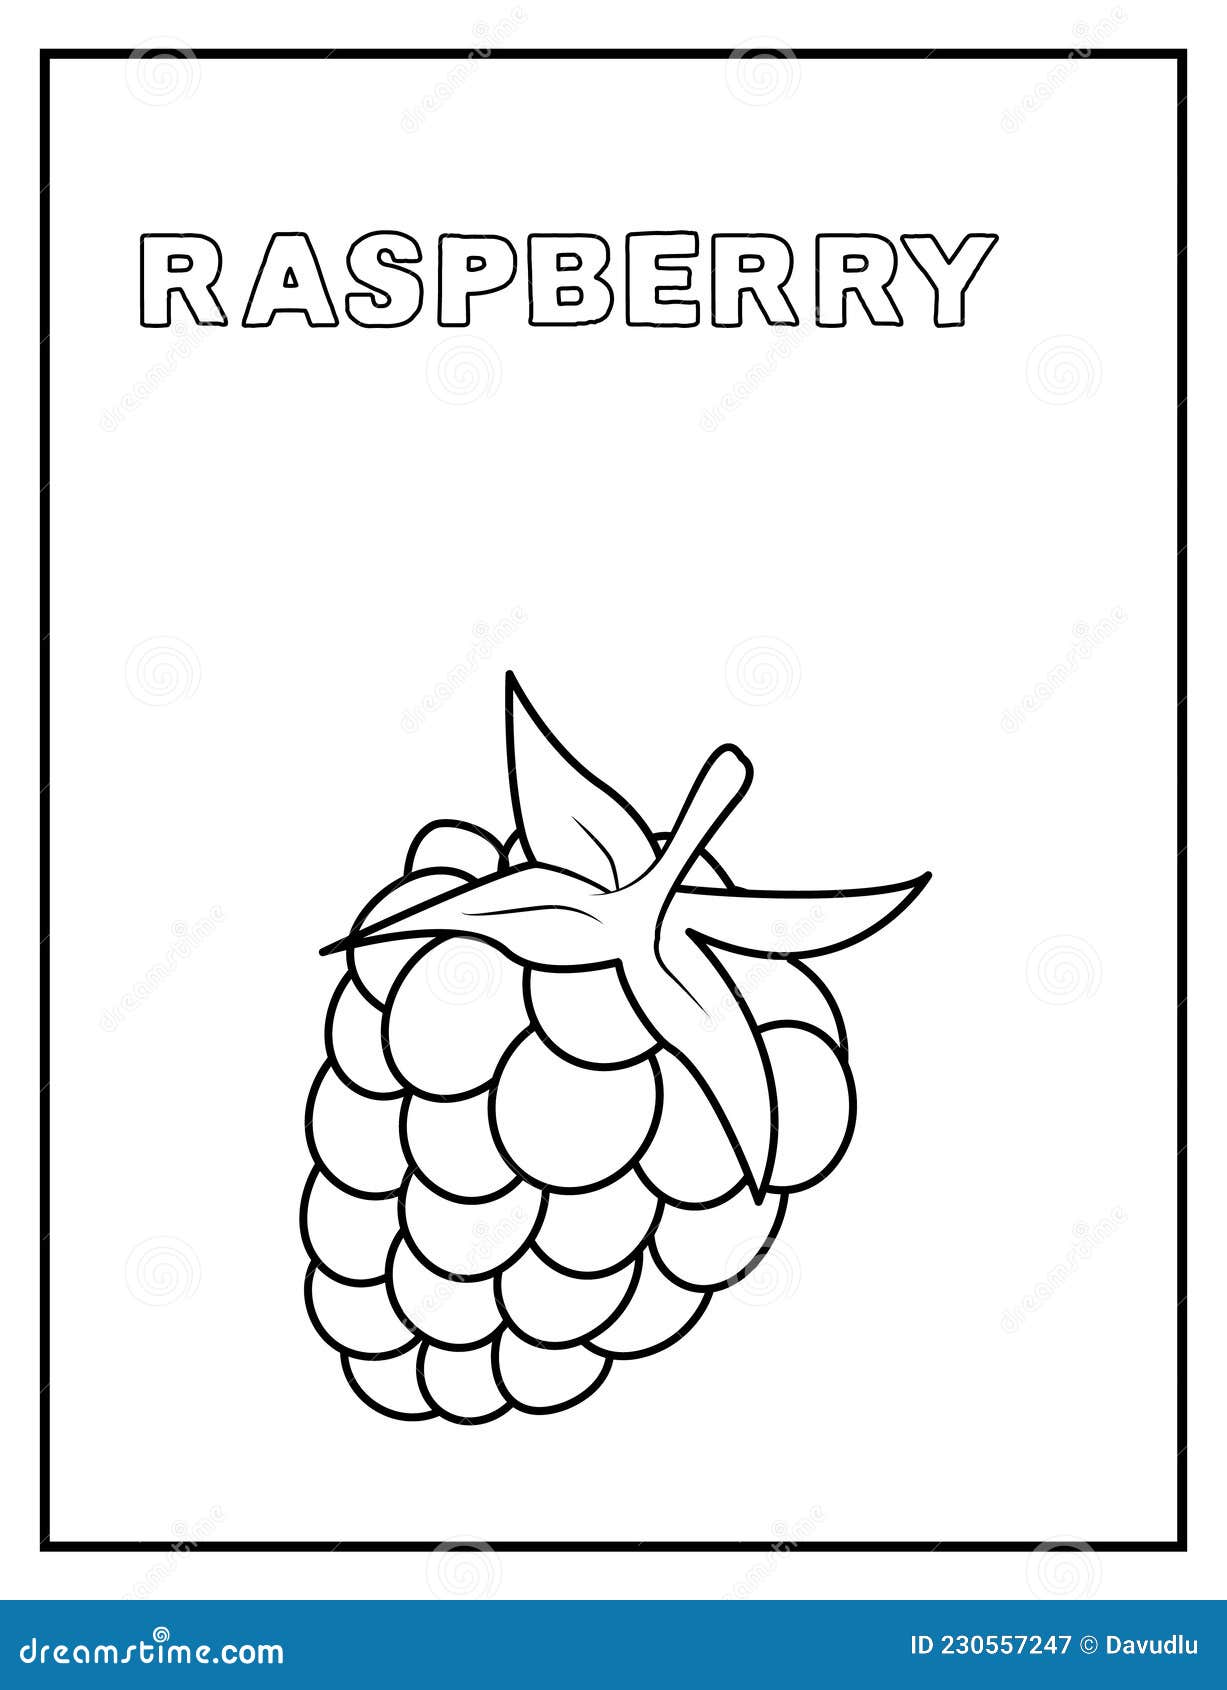 Cute raspberry black and white coloring page with name great for toddlers and kids any age stock illustration